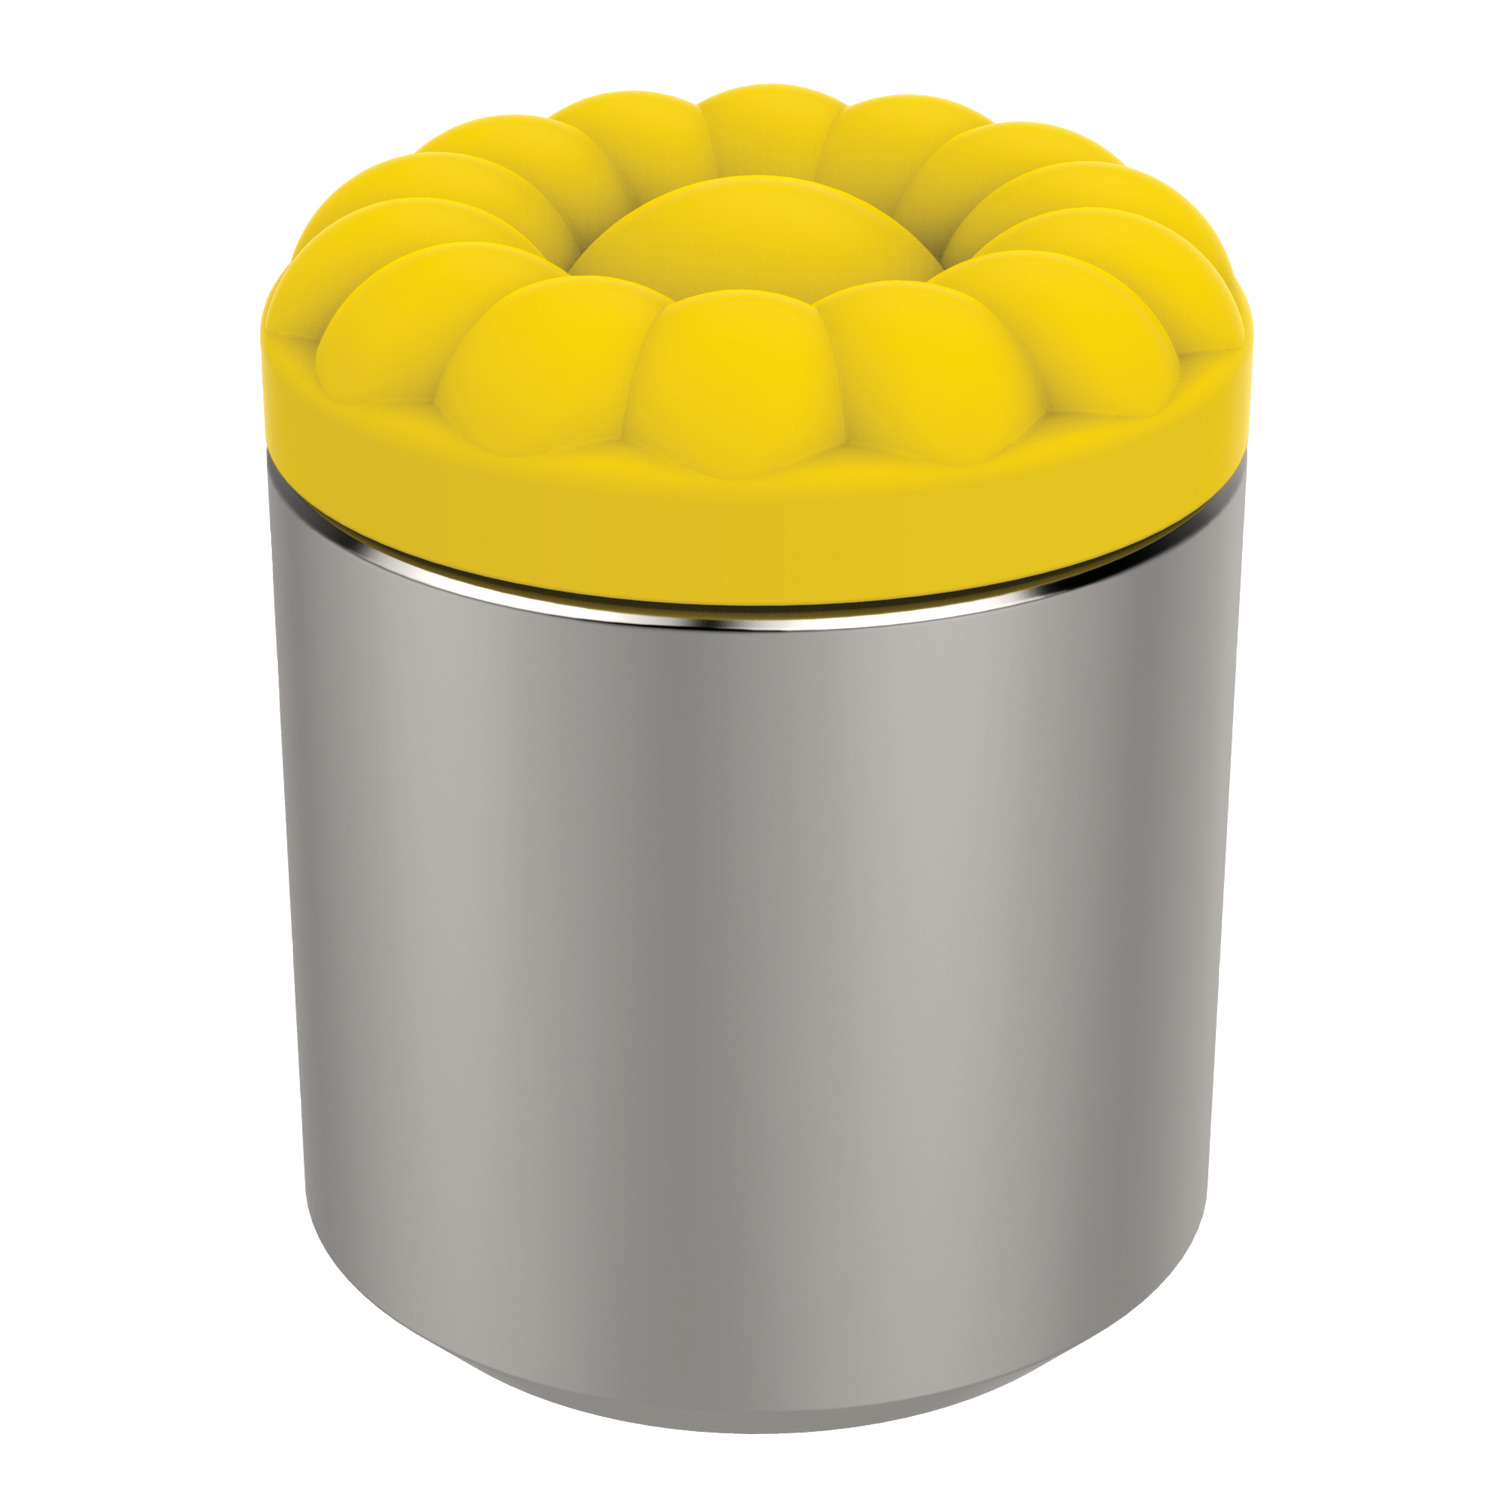 Grippers - Urethane Coated Round urethane coated gripping pads in stainless steel body, for rear fixing. Available in three different durometers. Bubbled texture makes them ideal for avoiding suction.